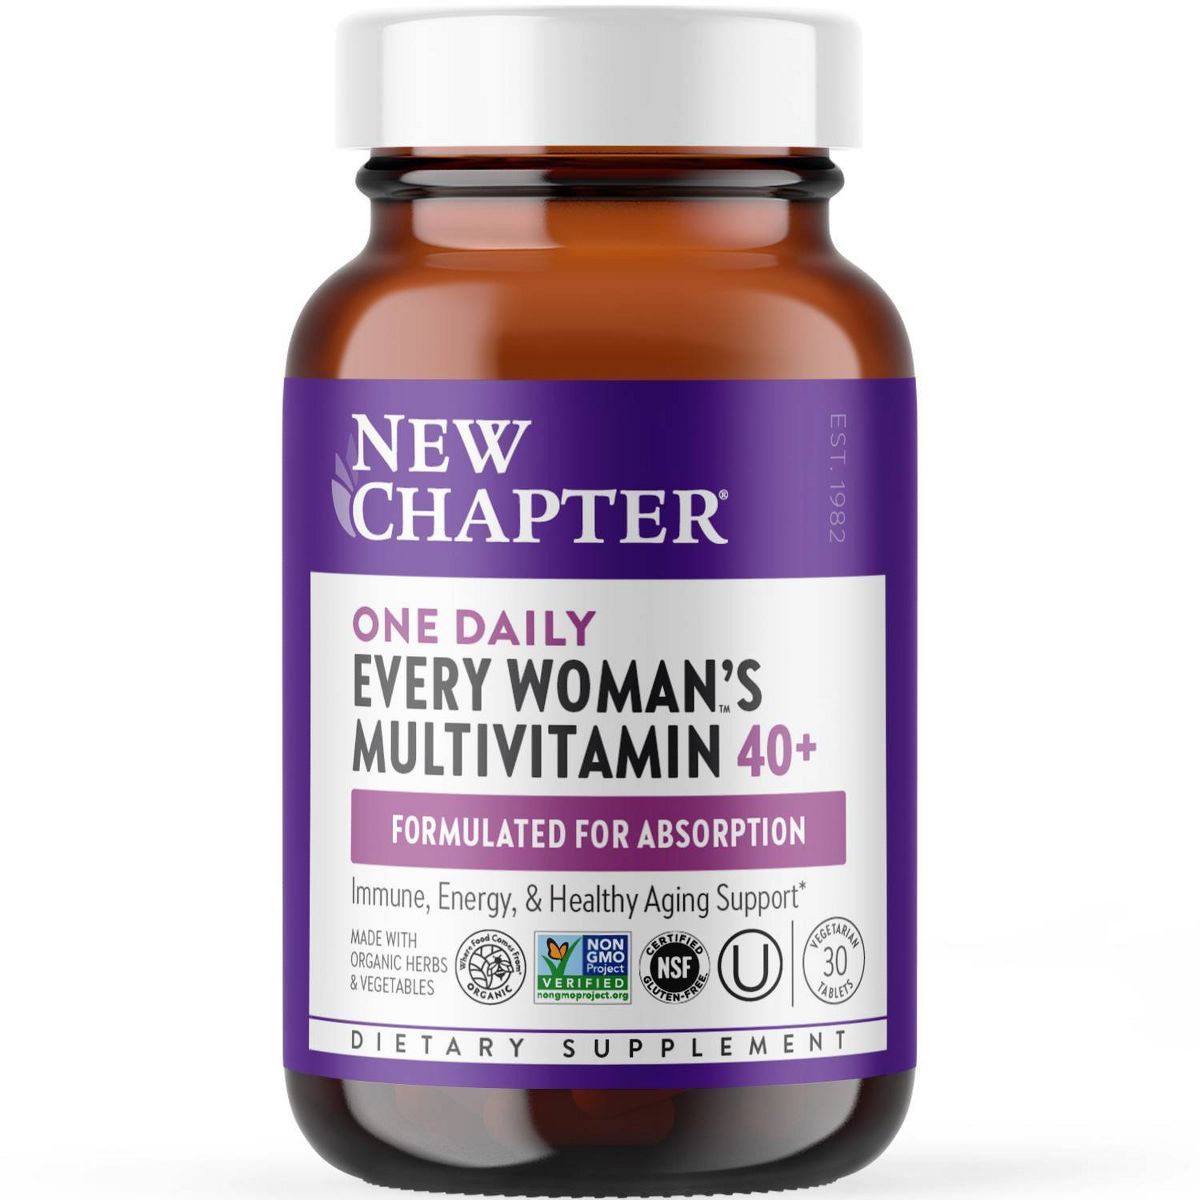 New Chapter Women's Multivitamin 40+ for Energy, Healthy Aging + Immune Support - 30ct | Target